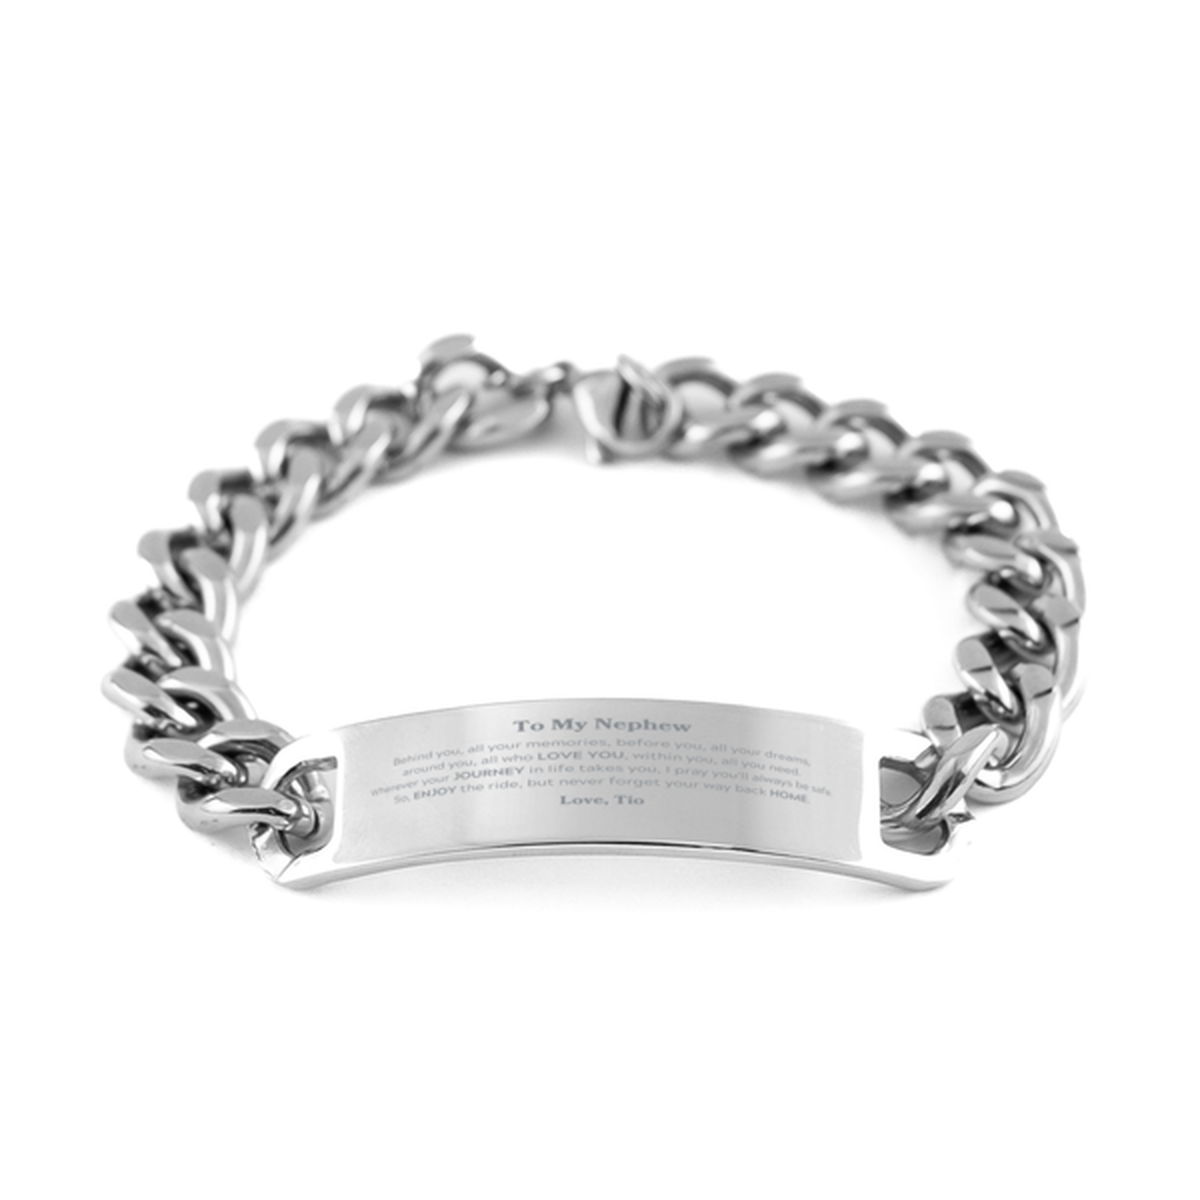 To My Nephew Graduation Gifts from Tio, Nephew Cuban Chain Stainless Steel Bracelet Christmas Birthday Gifts for Nephew Behind you, all your memories, before you, all your dreams. Love, Tio